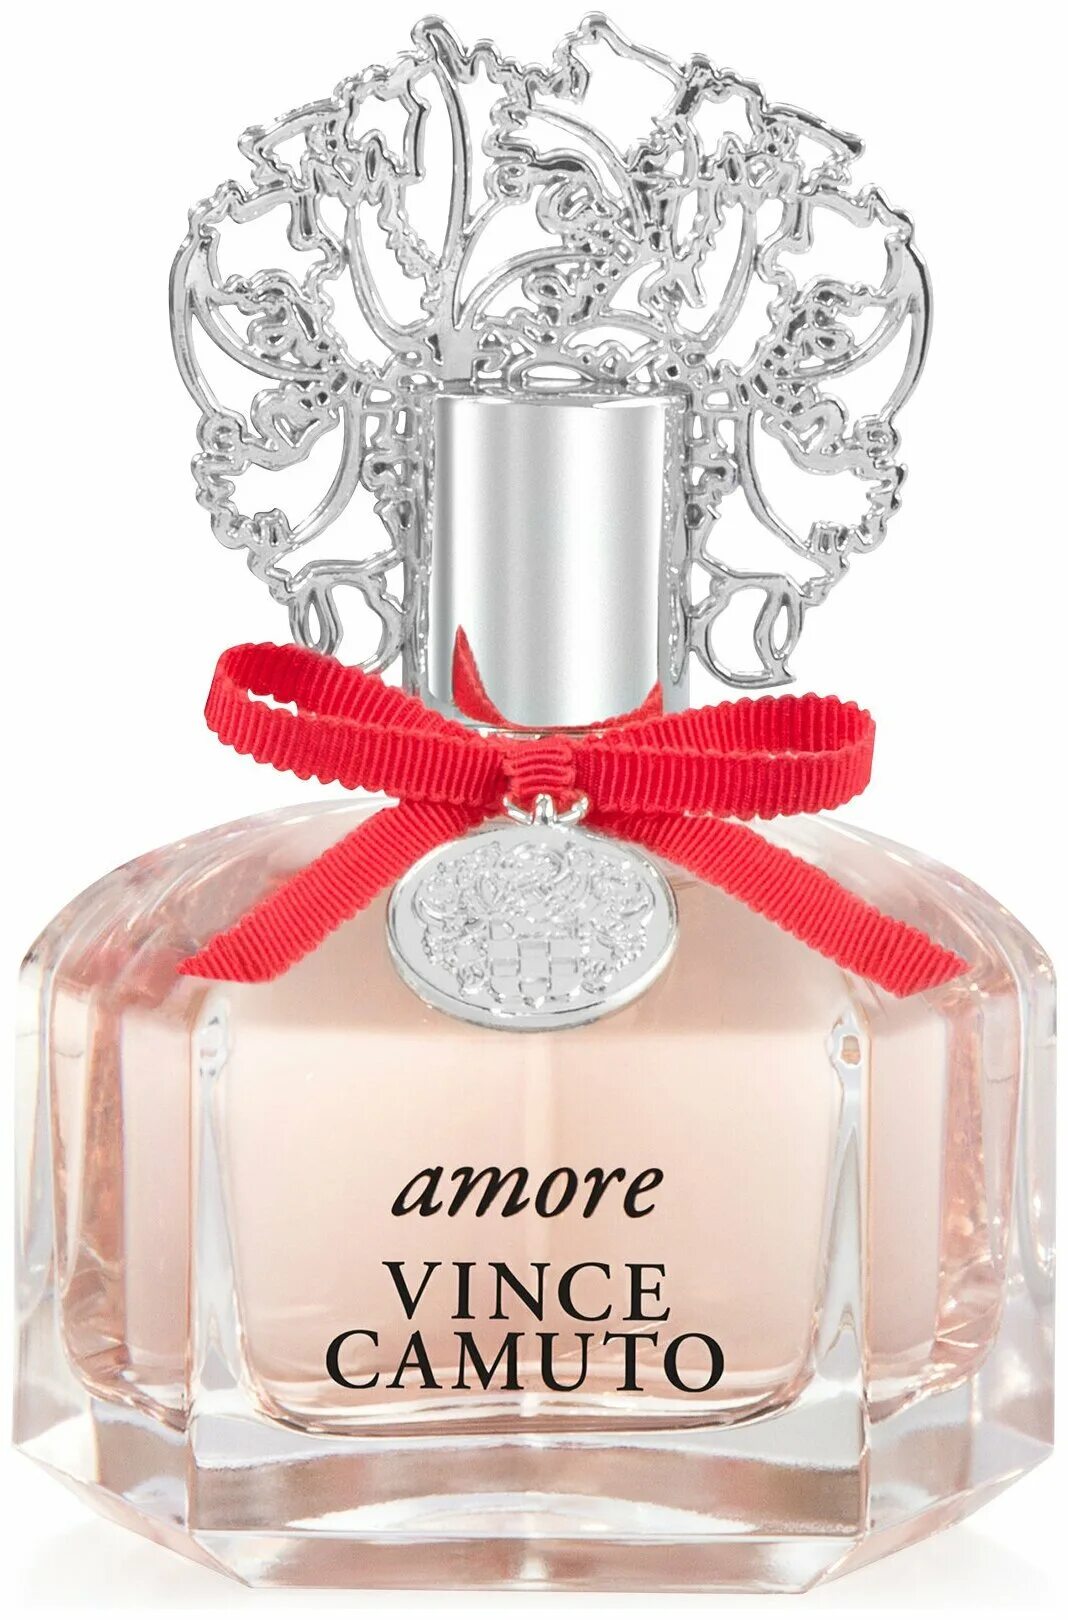 Terra amore. Духи Amore Vince Camuto. Vince Camuto Amore 30 мл. Amore Vince Camuto для женщин. Vince Camuto femme.